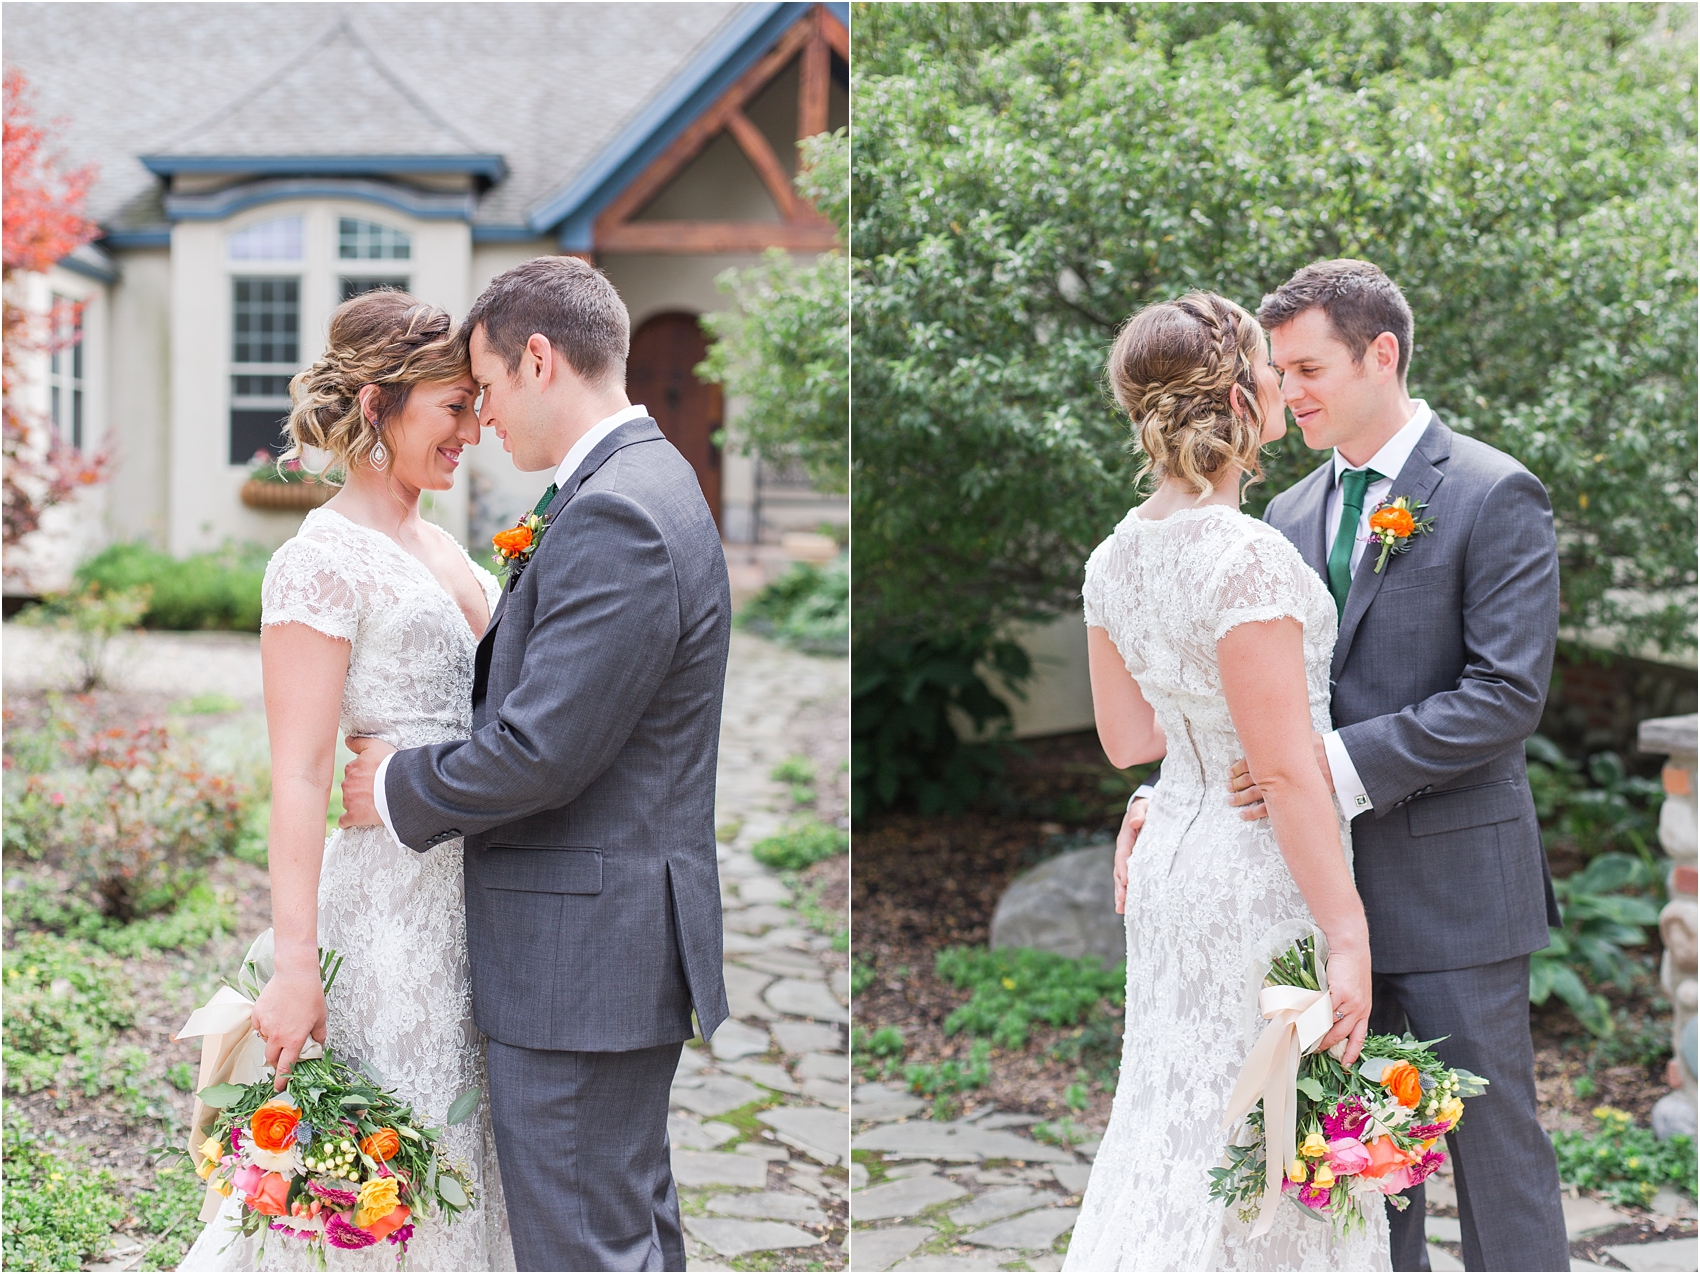 romantic-intimate-backyard-wedding-photos-at-private-estate-in-ann-arbor-mi-by-courtney-carolyn-photography_0064.jpg